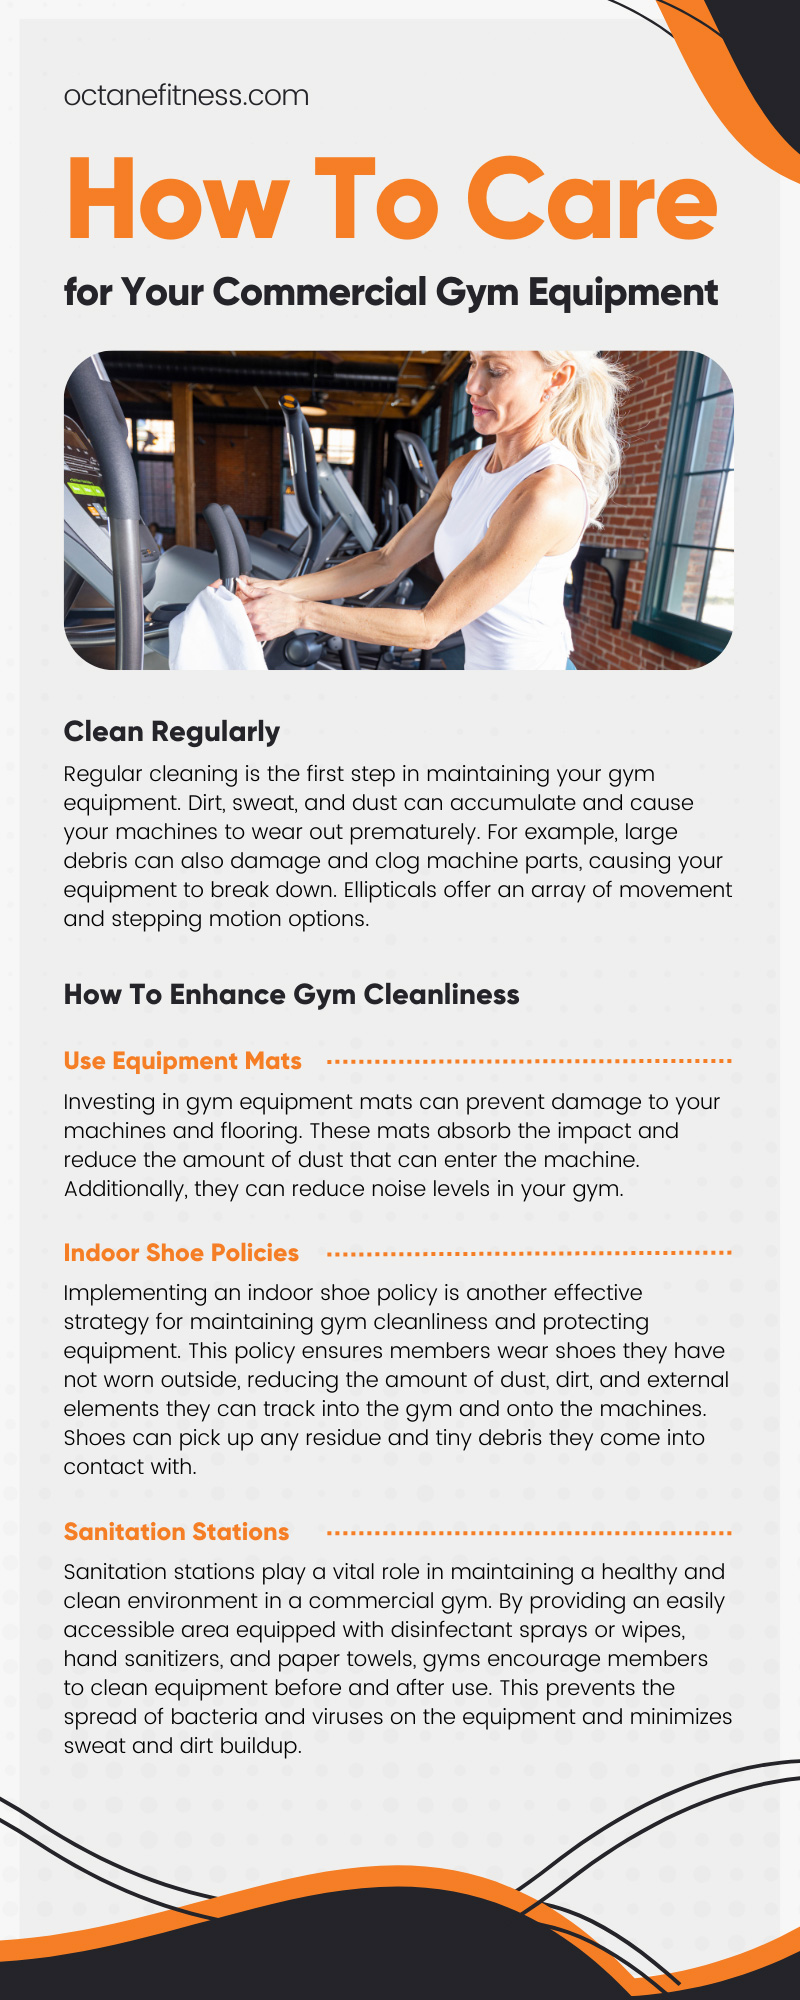 How To Care for Your Commercial Gym Equipment